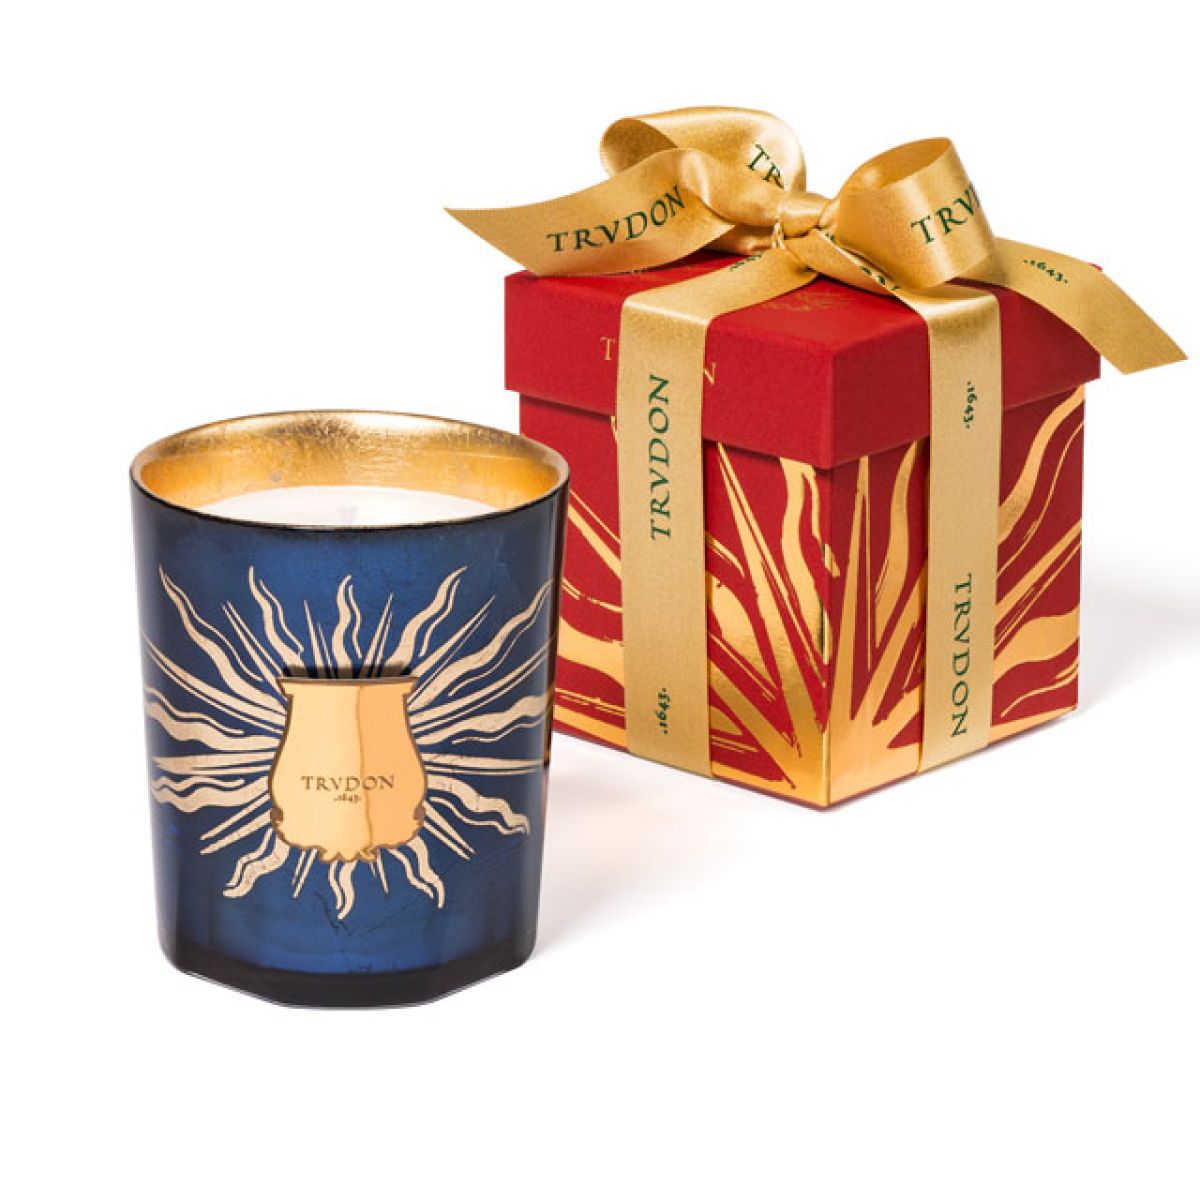 The Art of Gifting: the tradition & savoir-faire of gifts